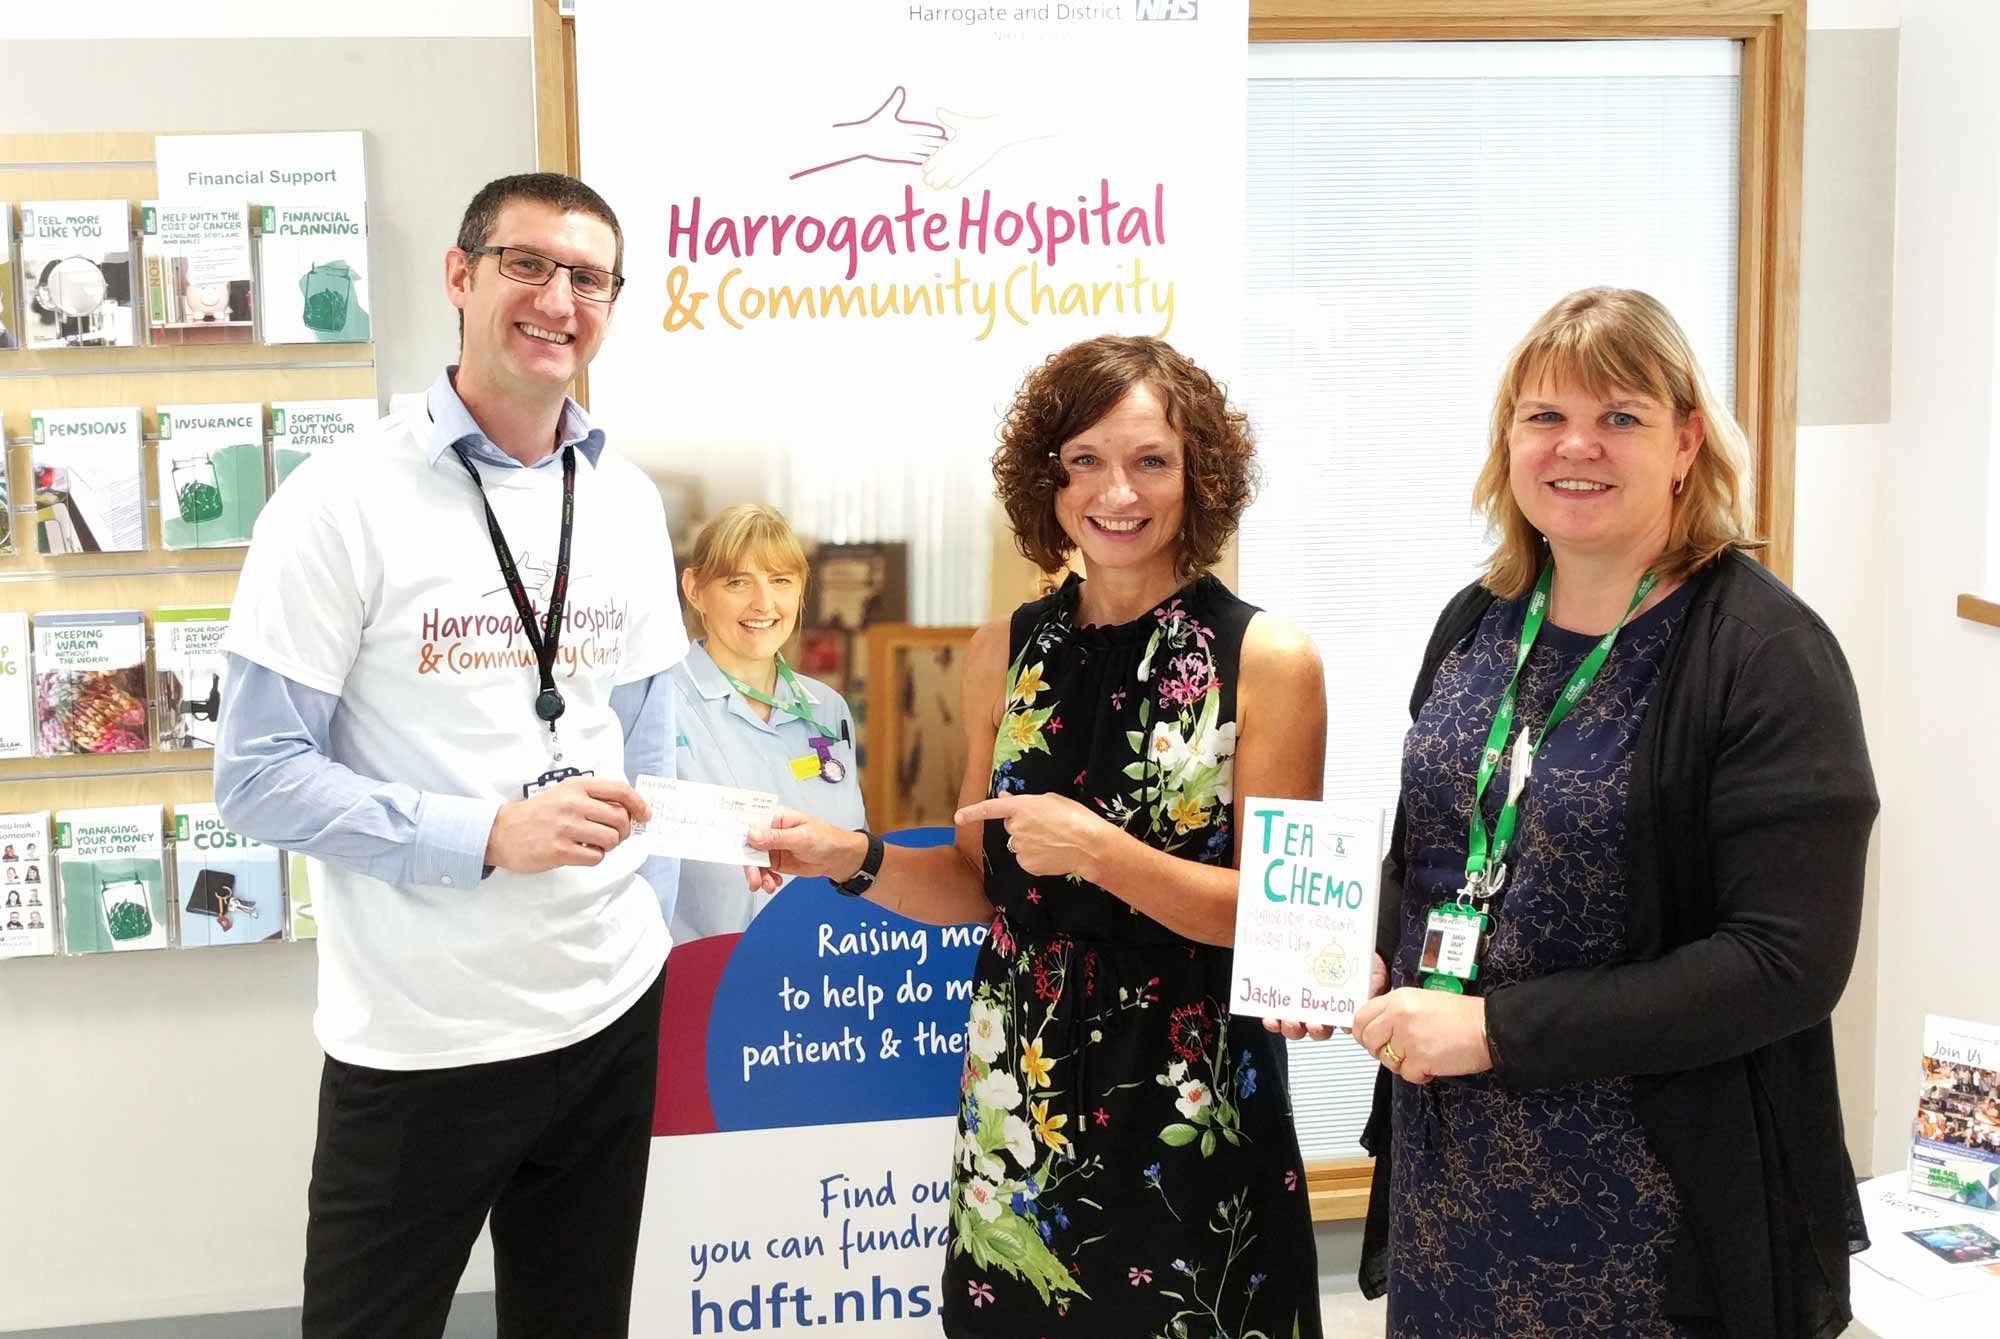 David Fisher, Community and Events Fundraiser at Harrogate Hospital and Community Charity, Jackie Buxton and Sarah Grant, Macmillan Patient Information and Health & Wellbeing Manager